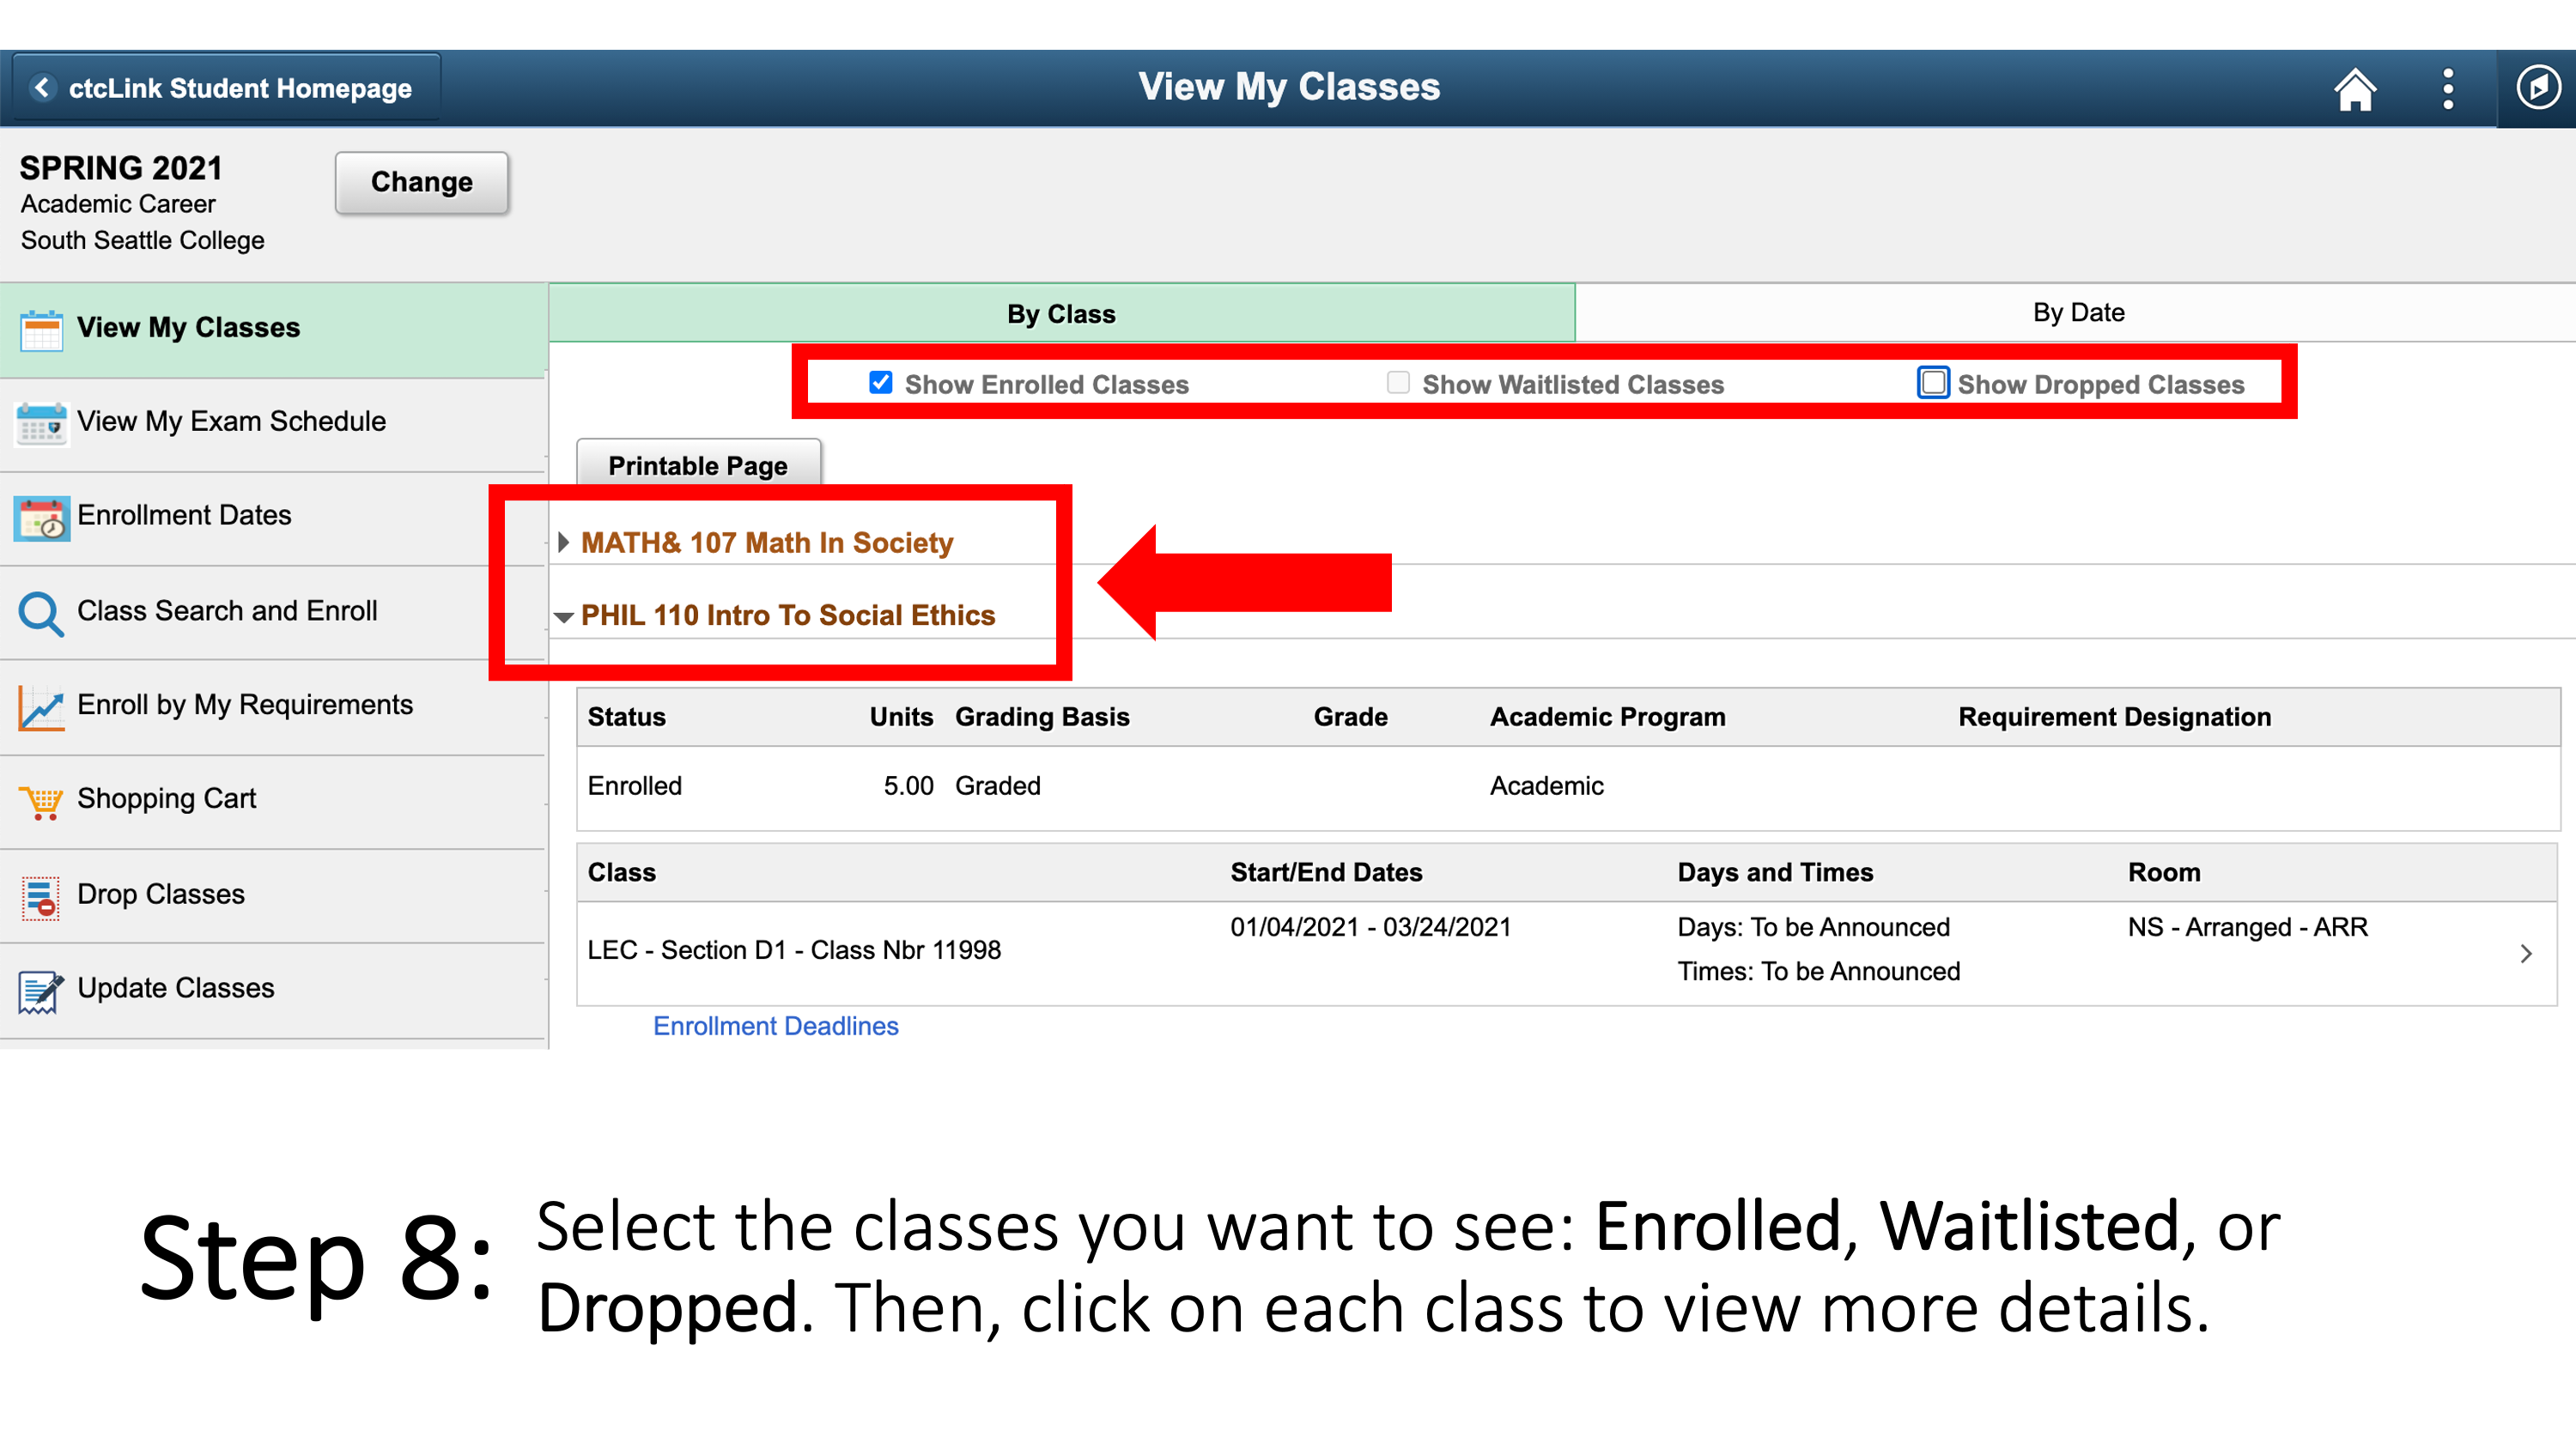 Select the classes you want to see: Enrolled, Waitlisted, or Dropped. Then, click on each class to view more details.